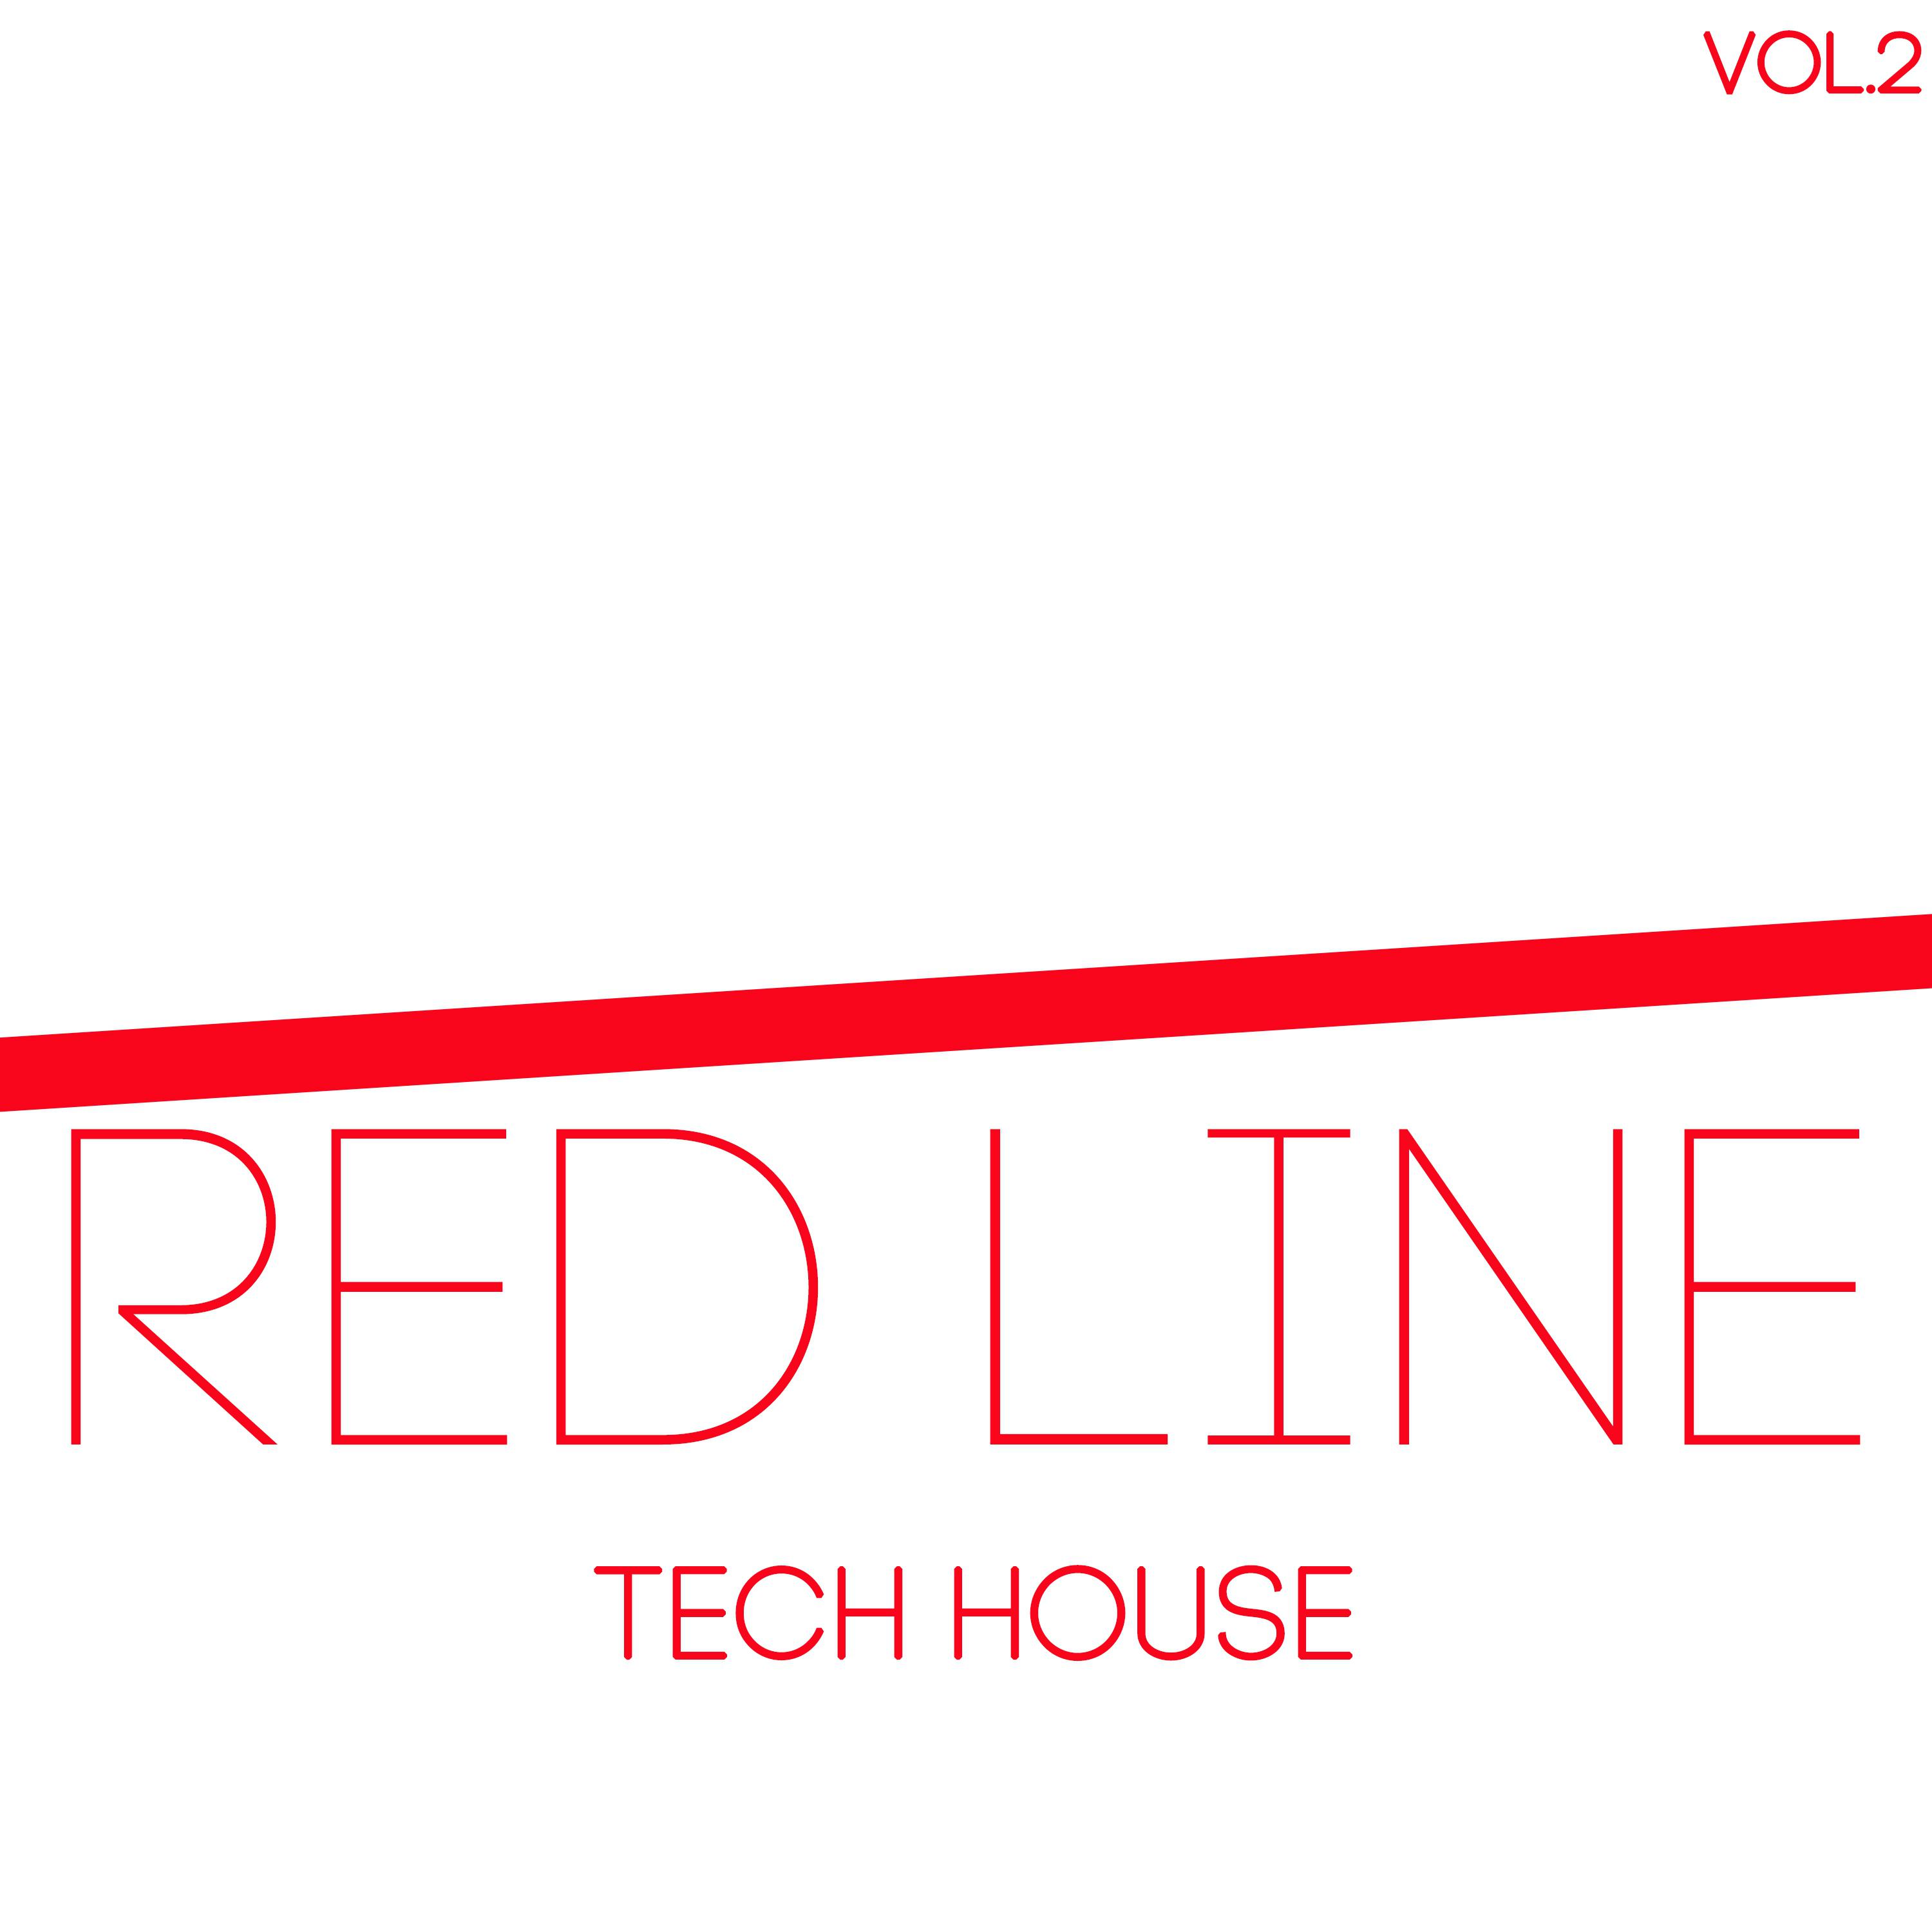 Red Line Tech House, Vol. 2